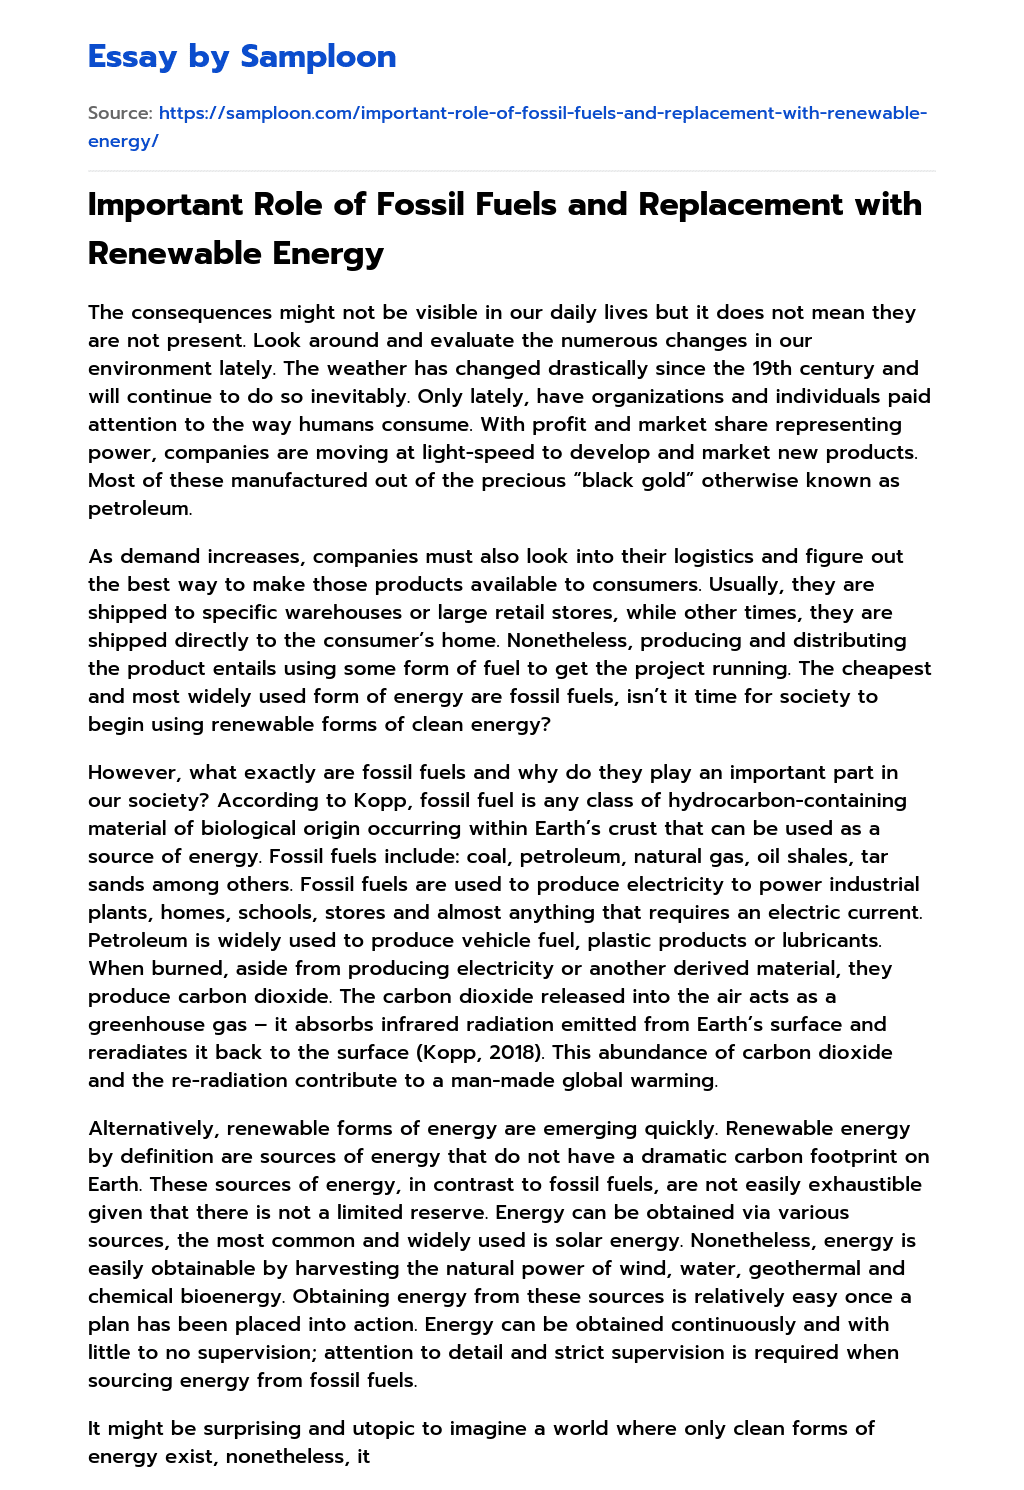 Important Role of Fossil Fuels and Replacement with Renewable Energy essay